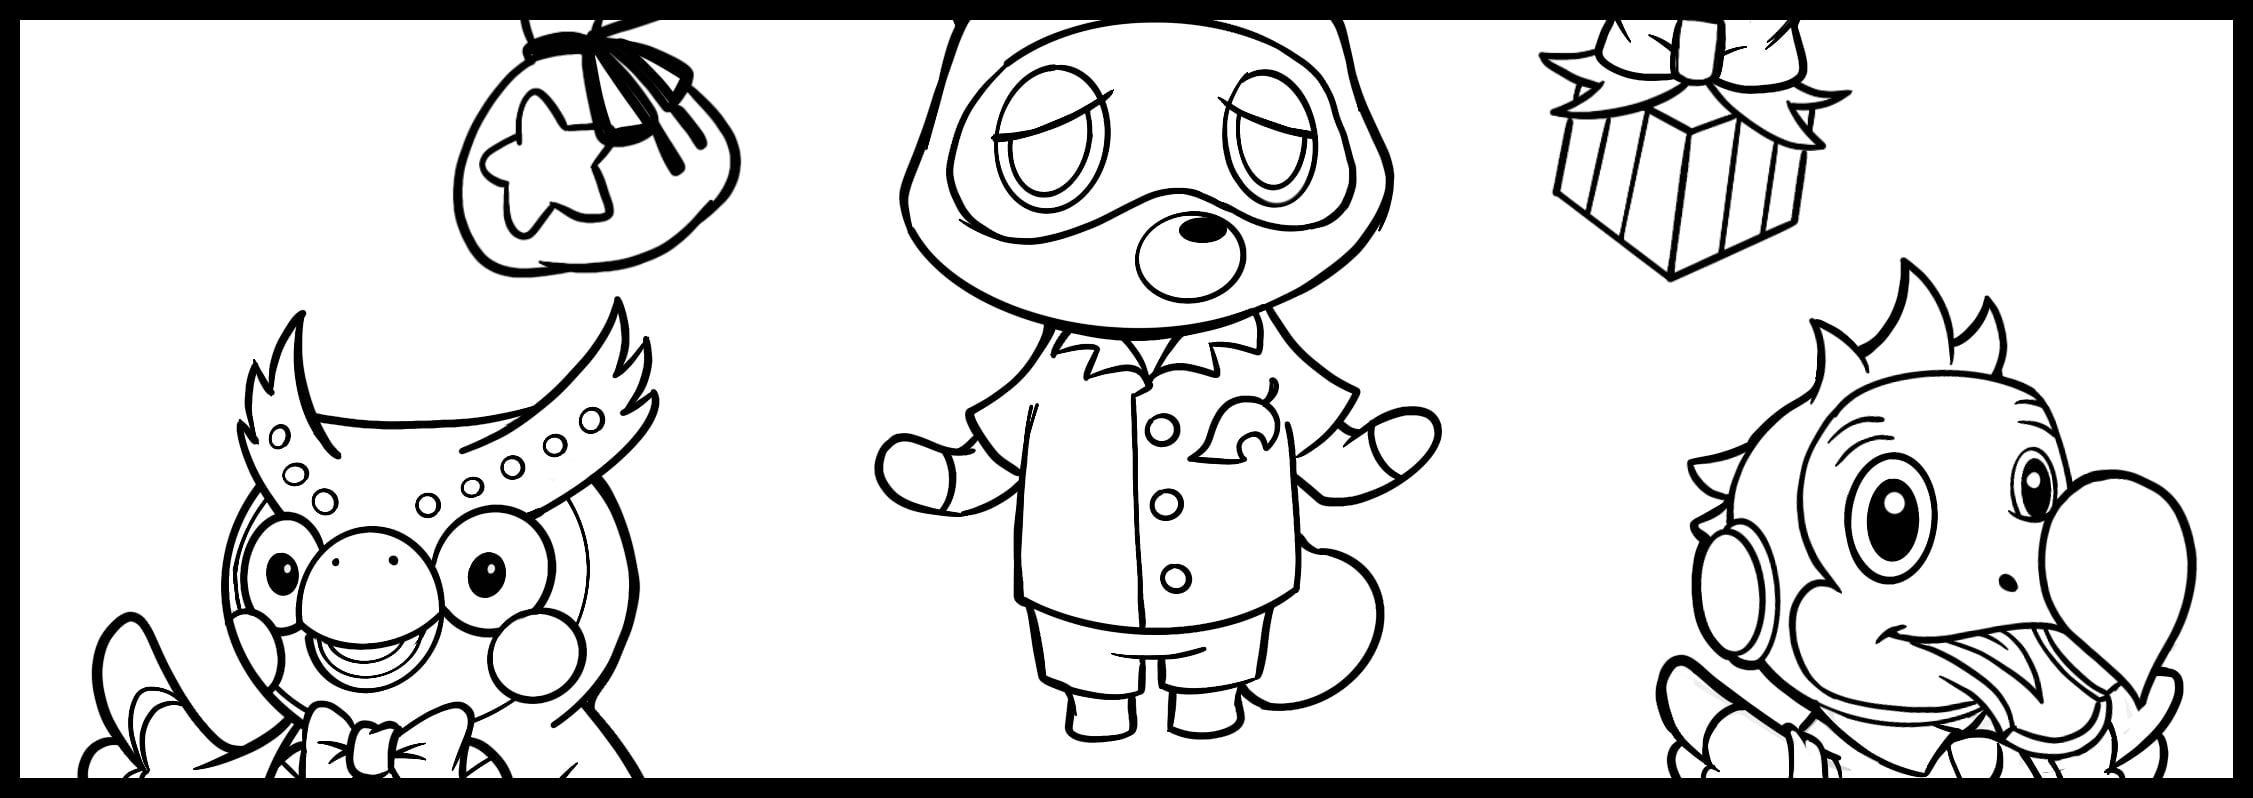 Animal Crossing Coloring Sheet By Chrissie Zullo – Rose City Comic Con